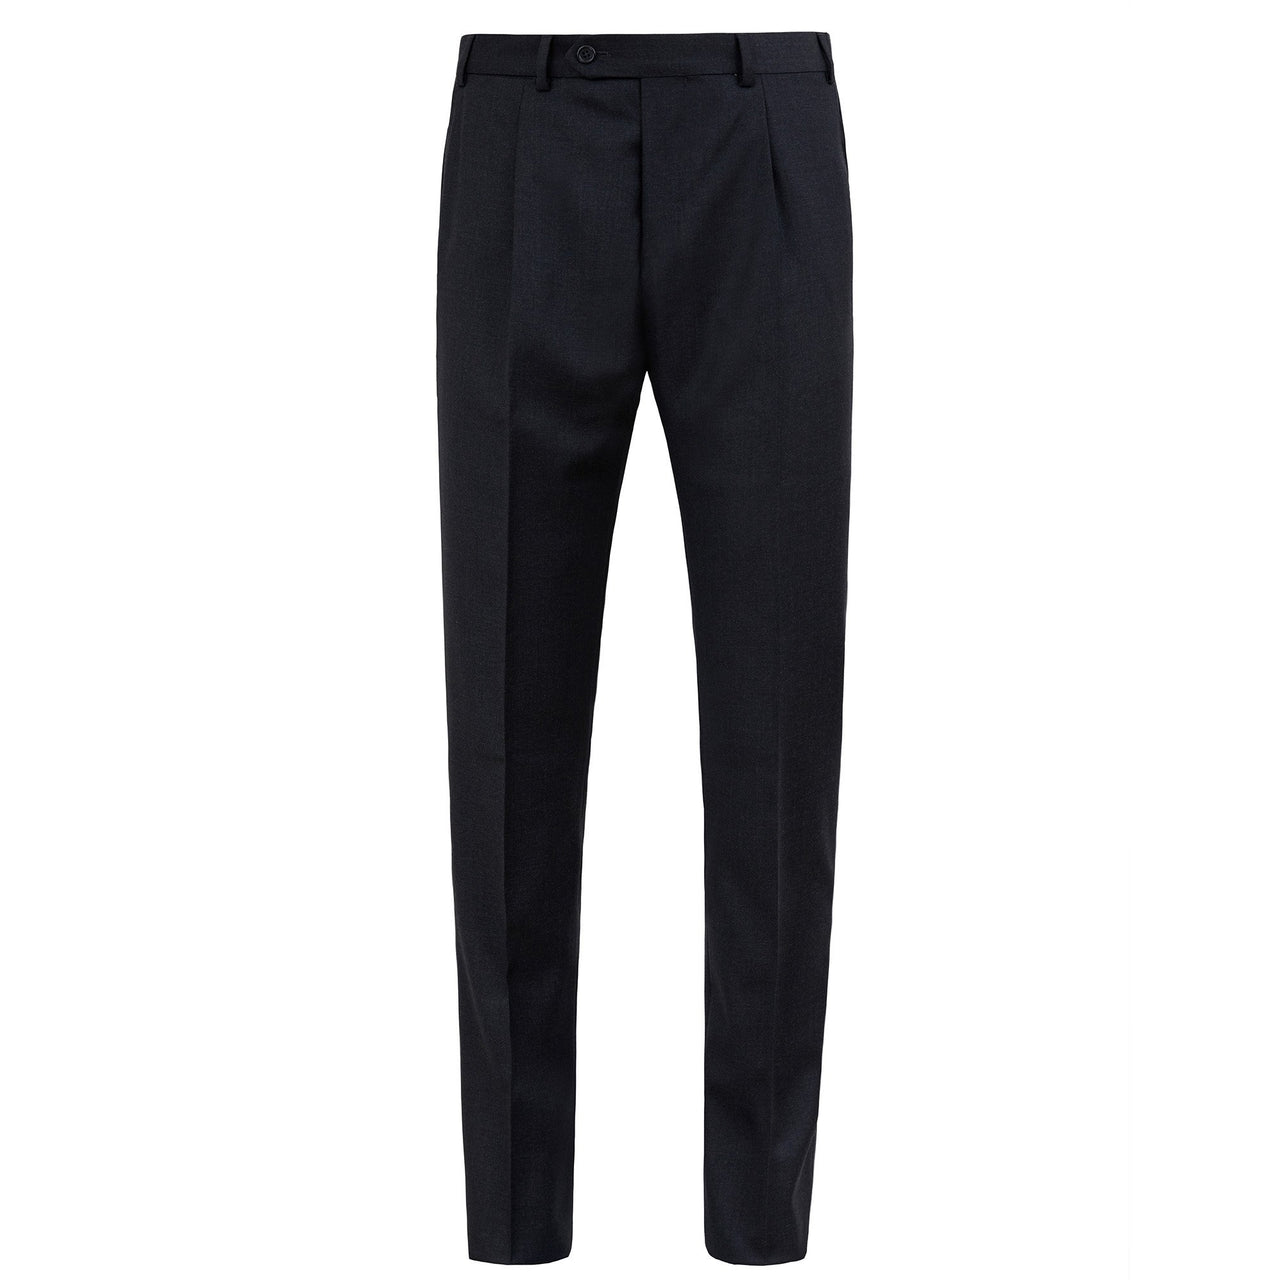 HENRY SARTORIAL Pleat Trousers CHARCOAL REG